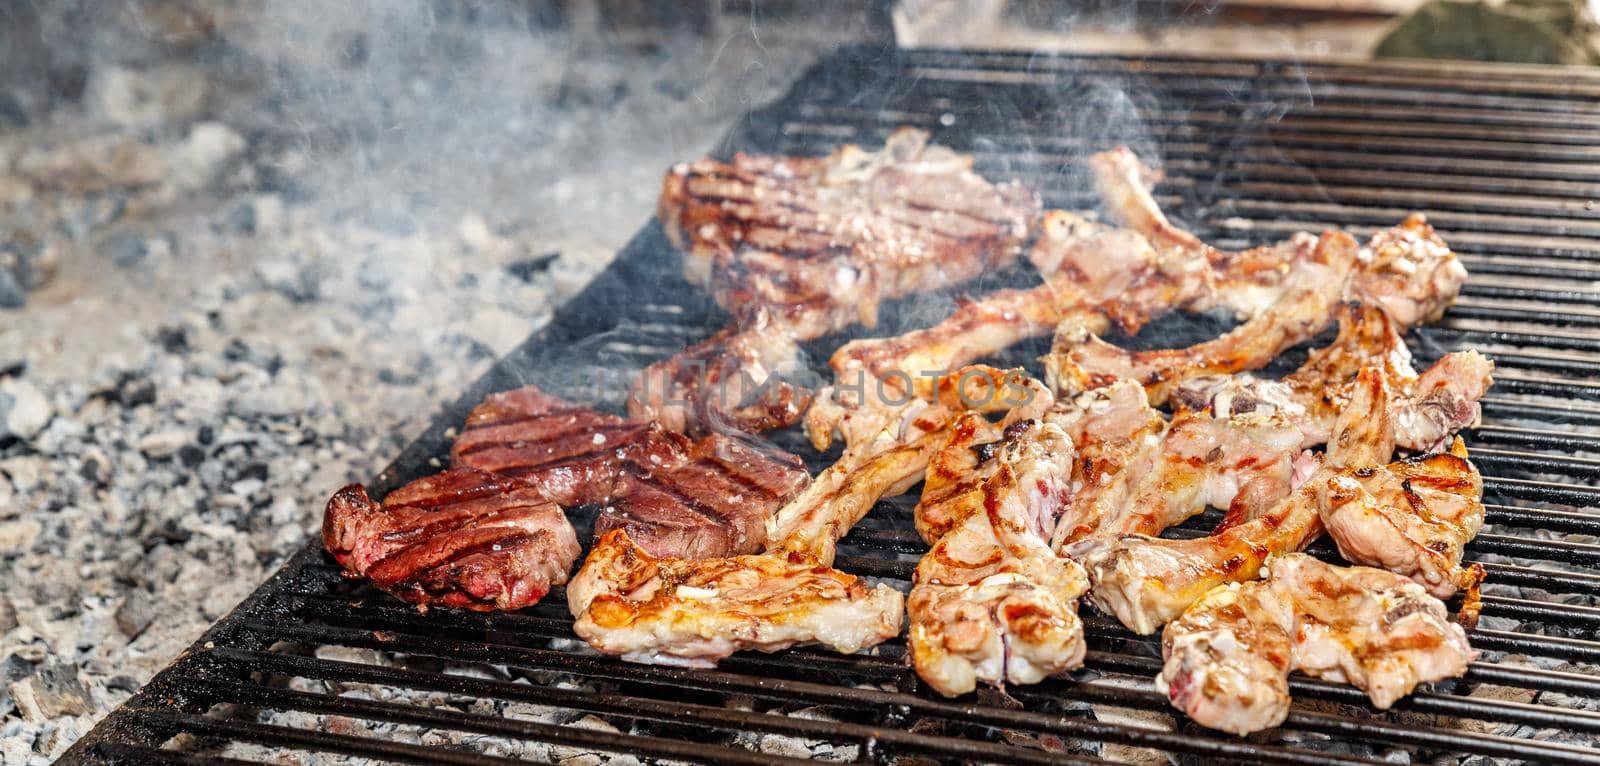 Lamb chops and sirloin steak on grill, shallow depth of field